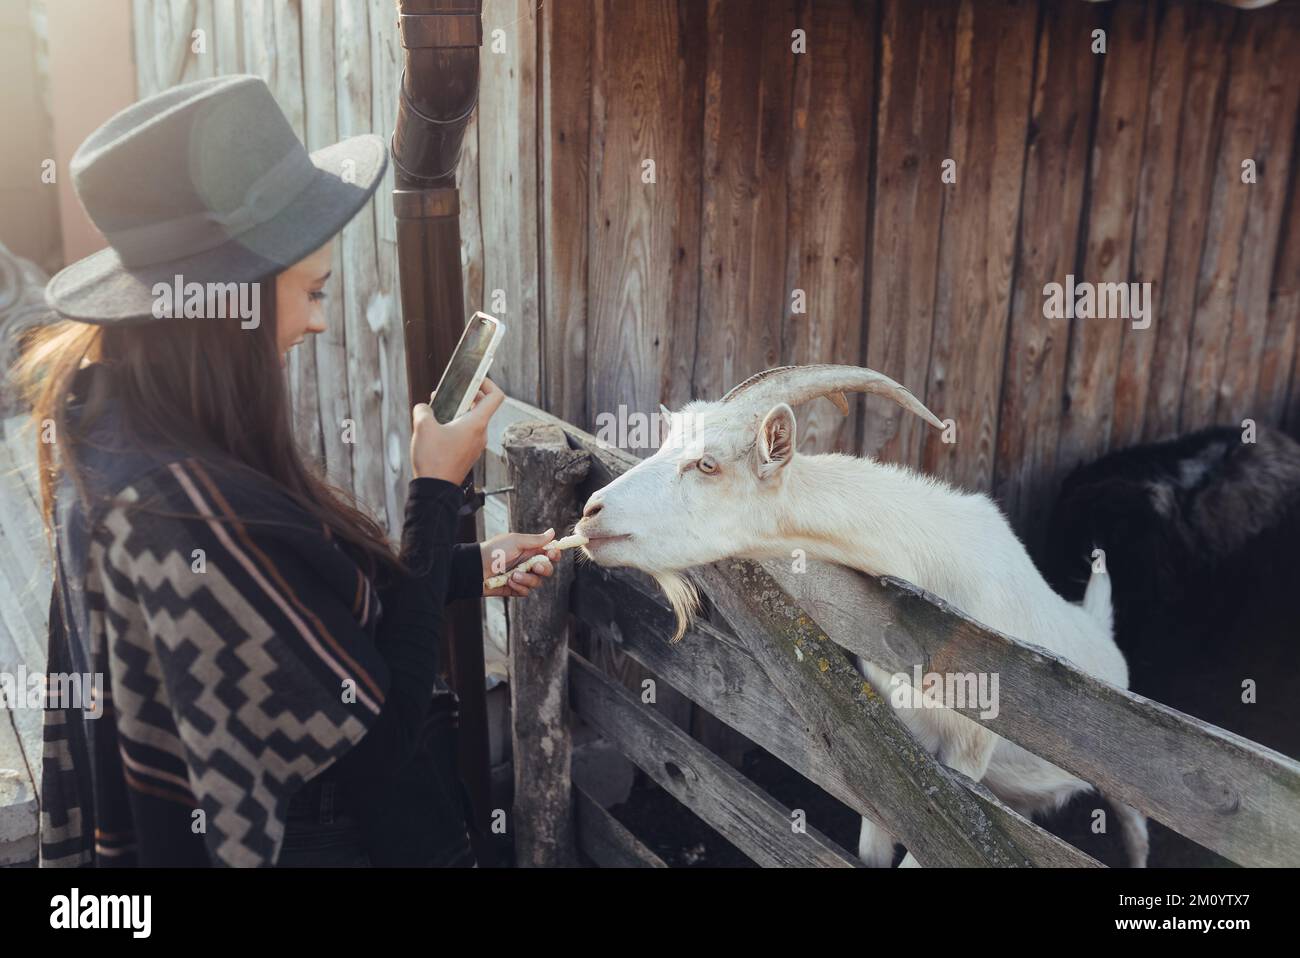 Woman takes a photo of a goat on her smartphone. Stock Photo